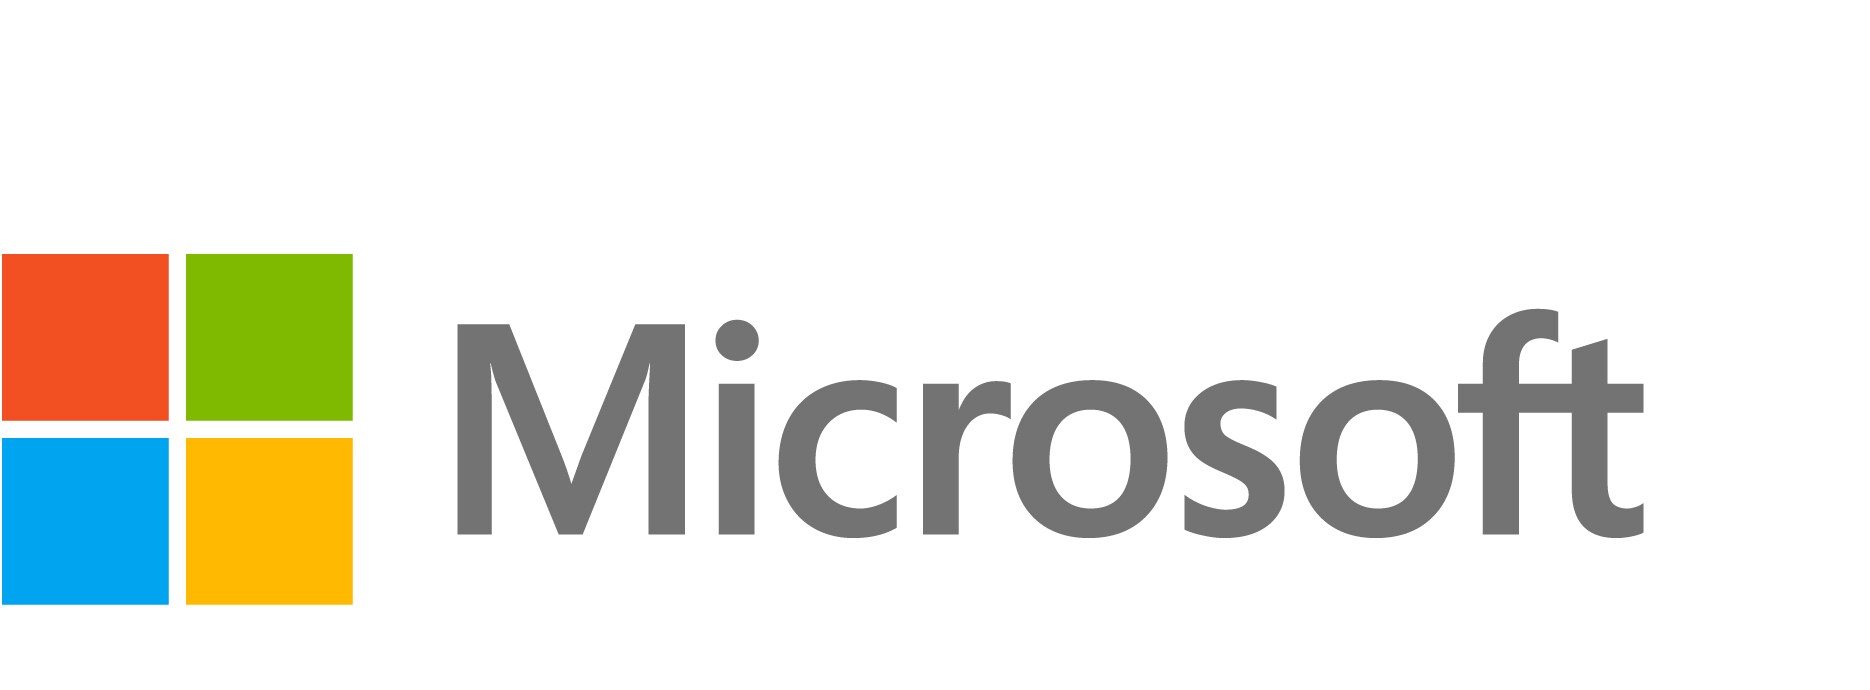 Microsoft Power Pages - subscription license (1 year) - 500 anonymous users